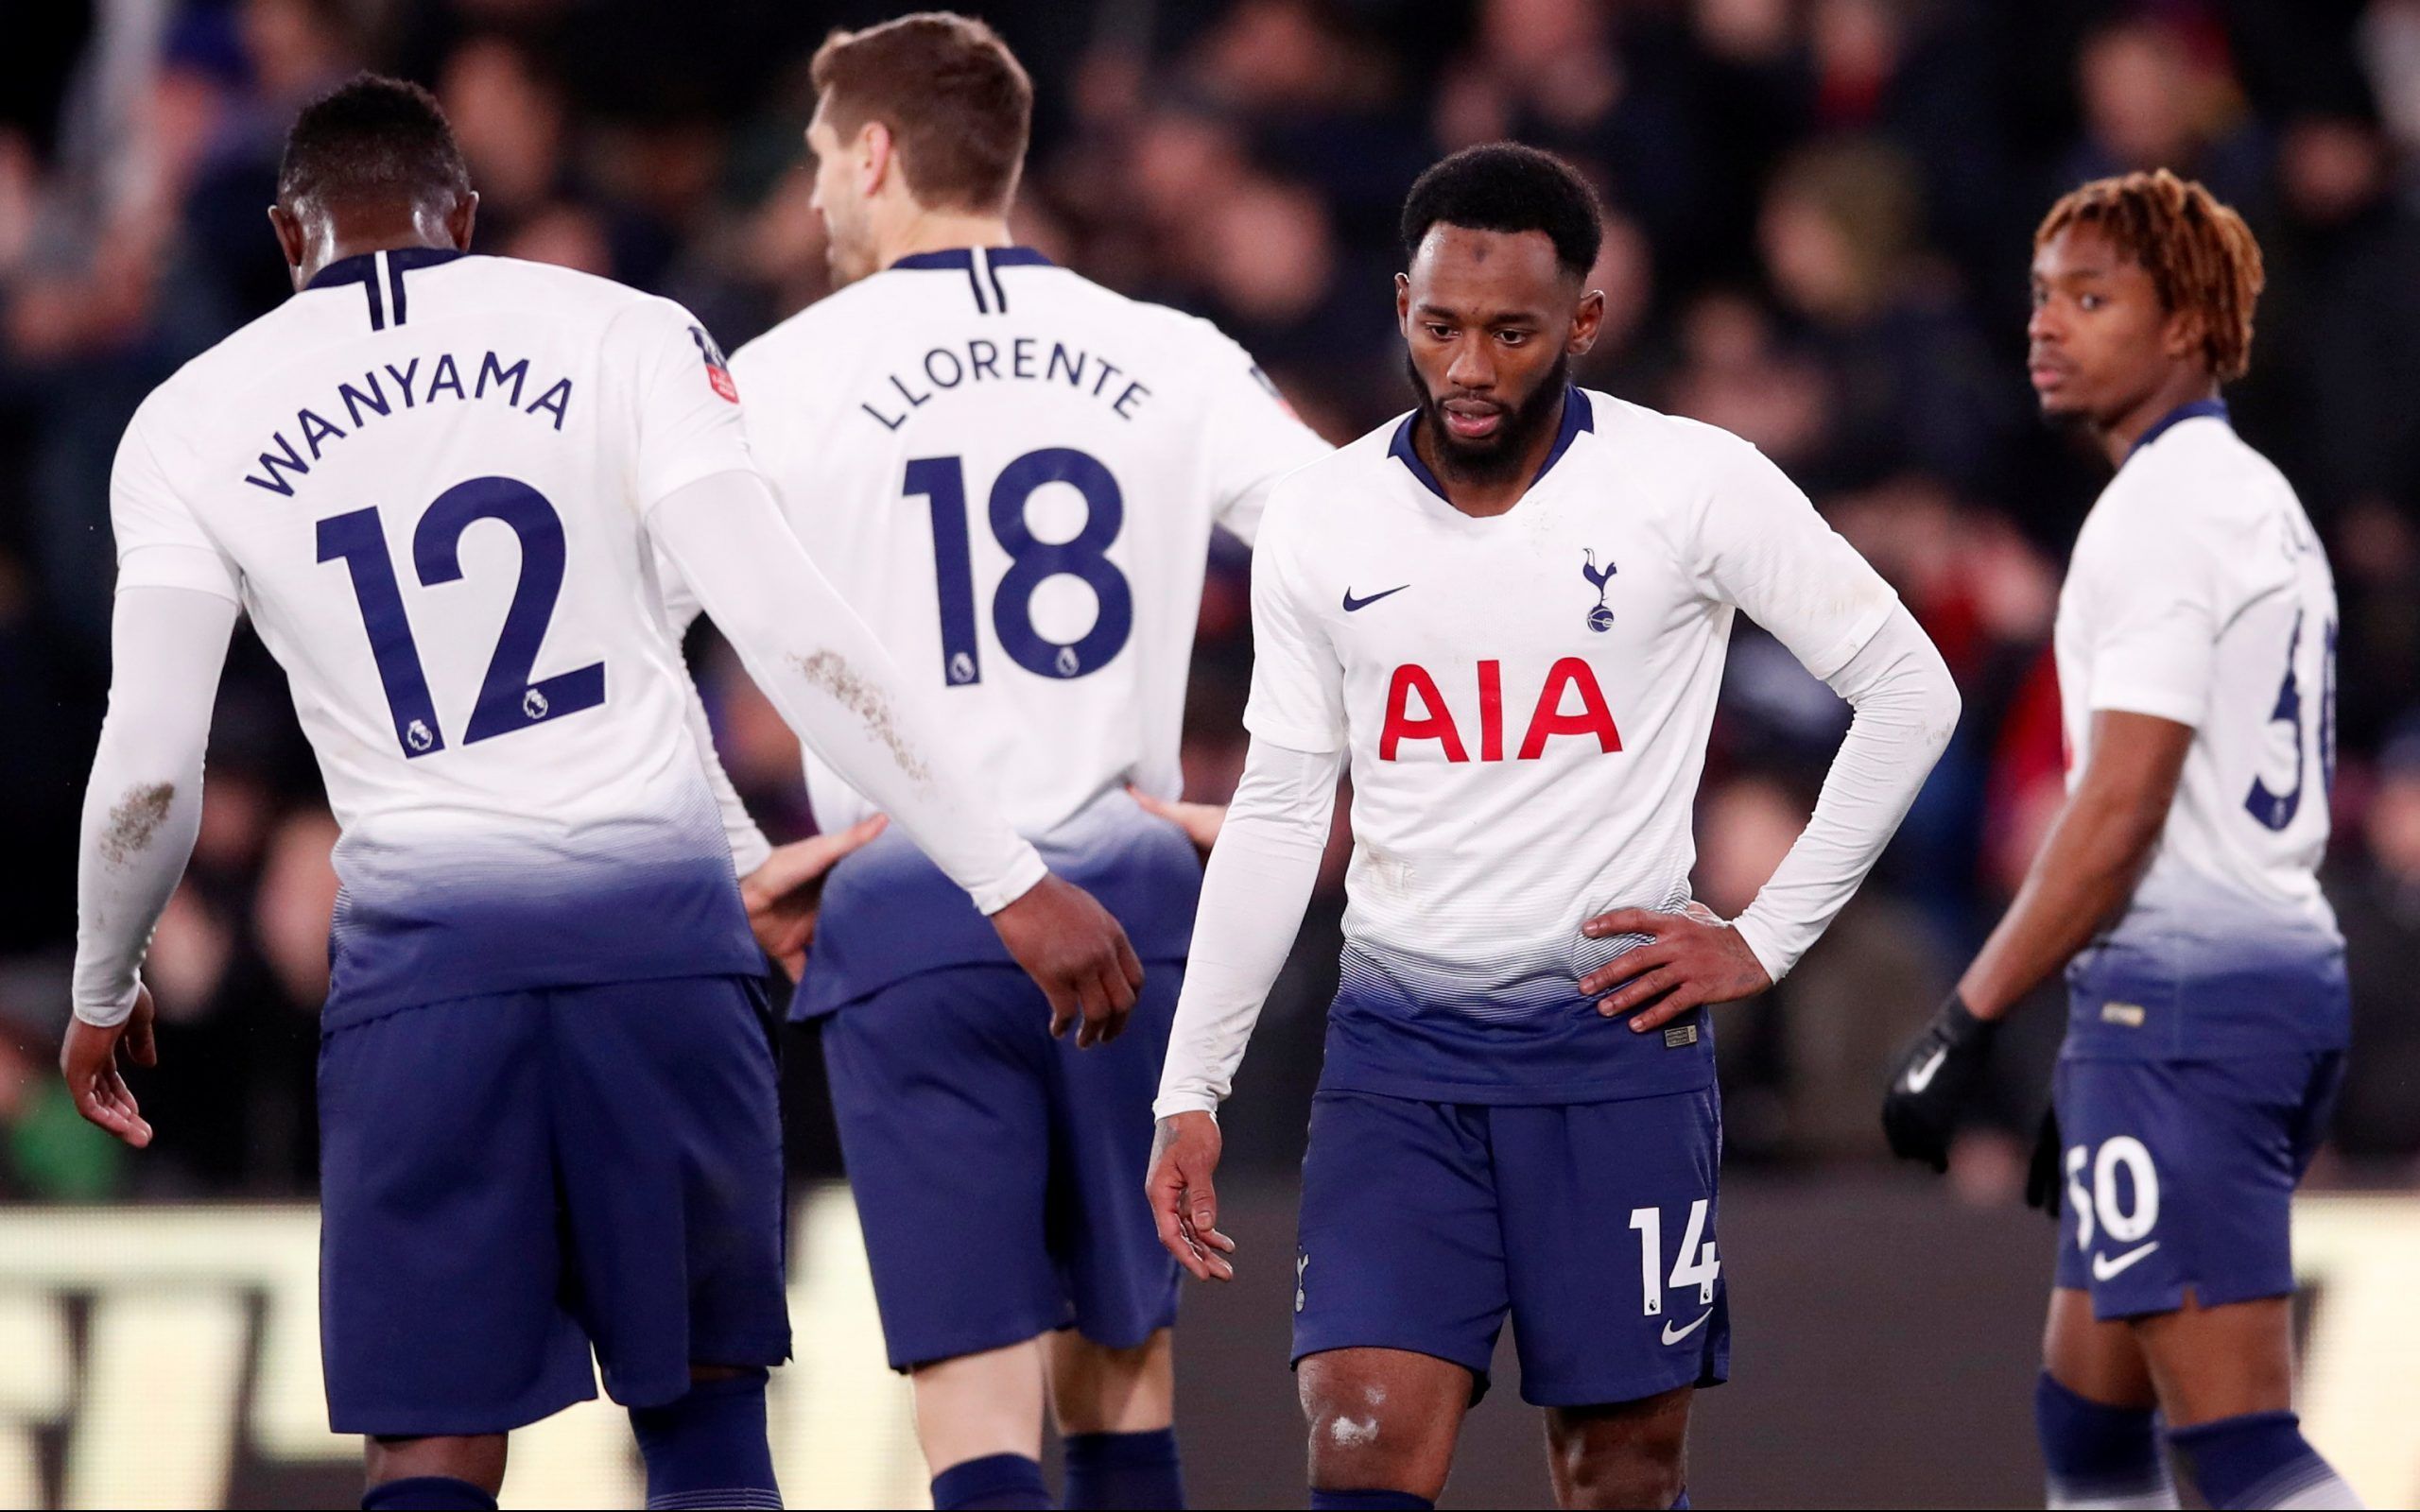 Soccer Football - FA Cup Fourth Round - Crystal Palace v Tottenham Hotspur - Selhurst Park, London, Britain - January 27, 2019  Tottenham's Georges-Kevin N'Koudou, Kazaiah Sterling and team mates react after the match   REUTERS/David Klein